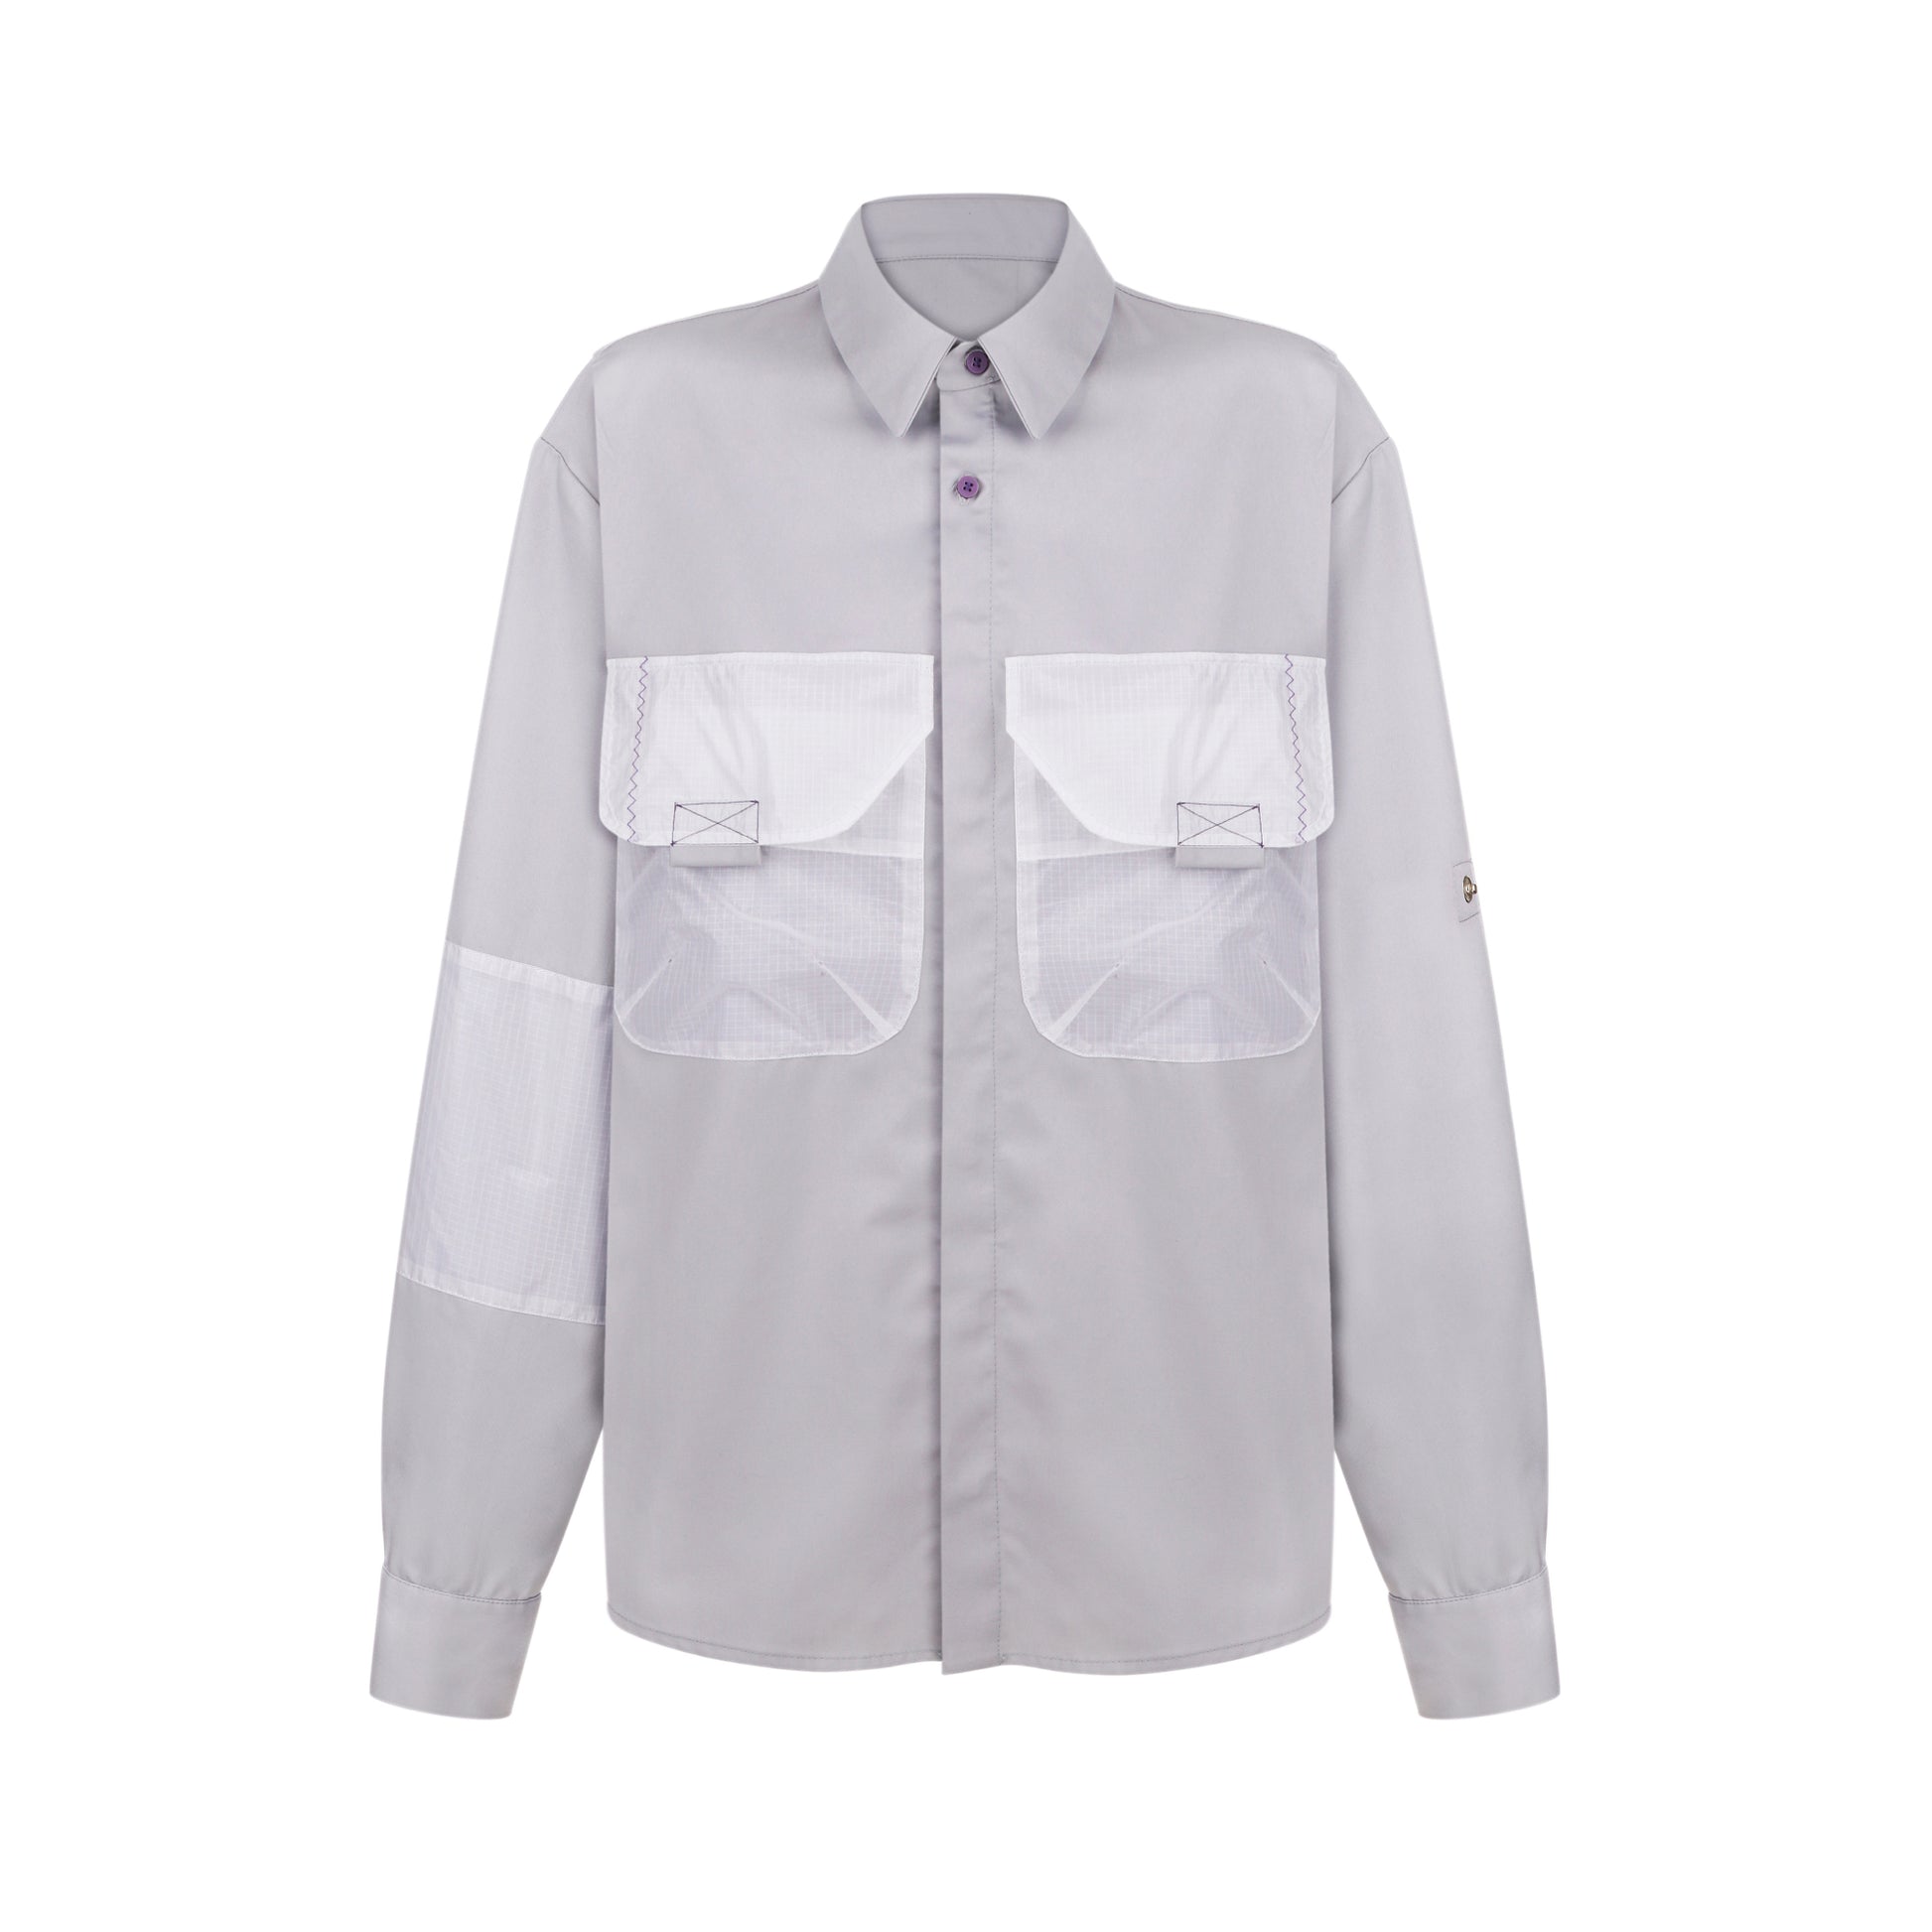 Grey double pocket shirts from REwind manufacturer brand